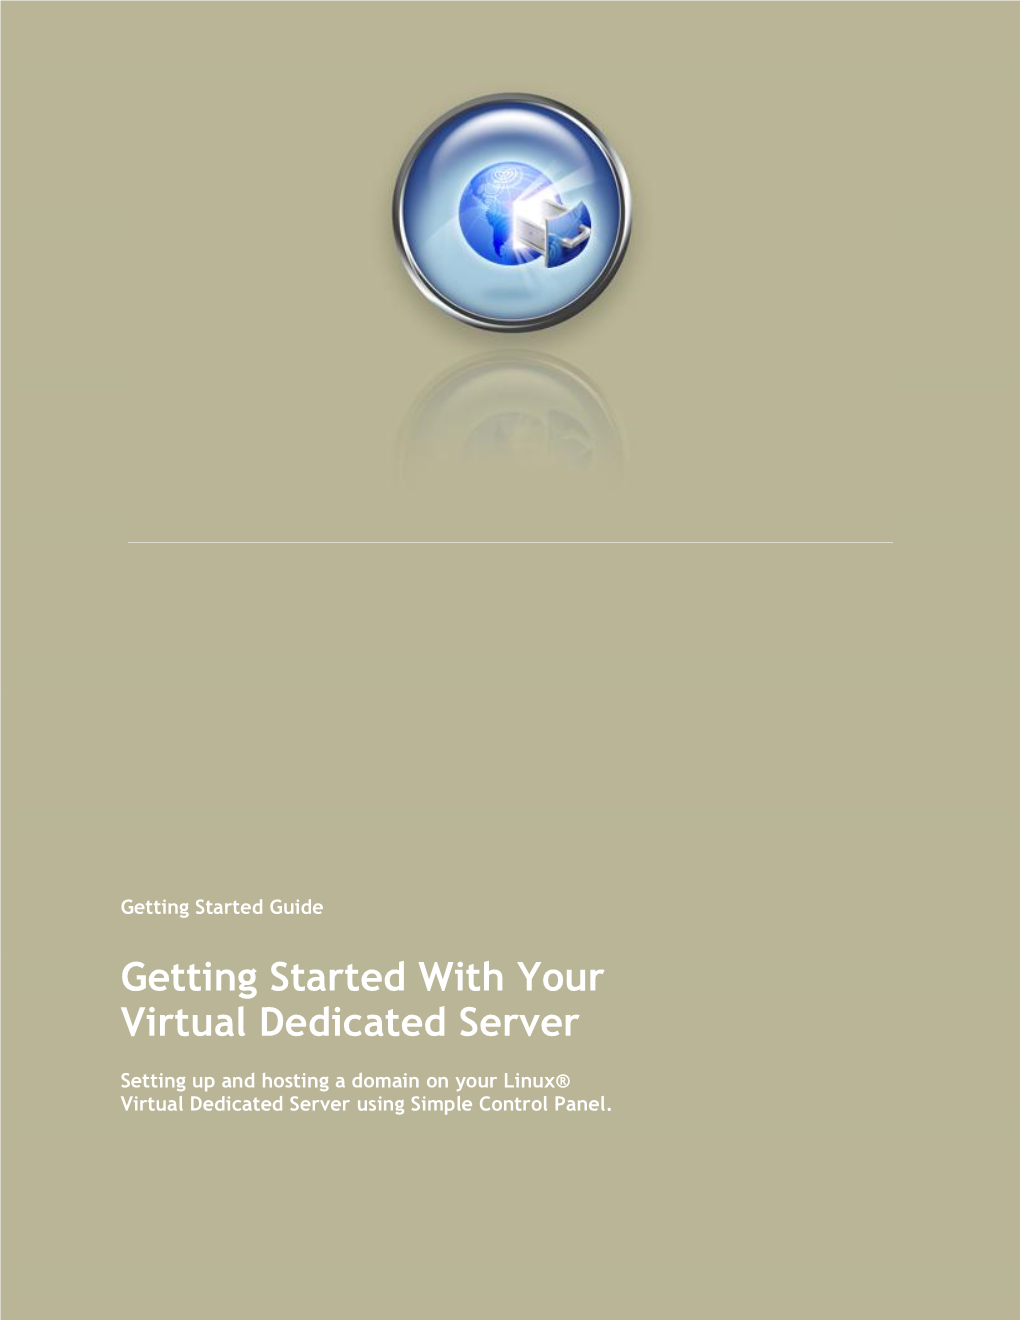 Getting Started with Your Virtual Dedicated Server